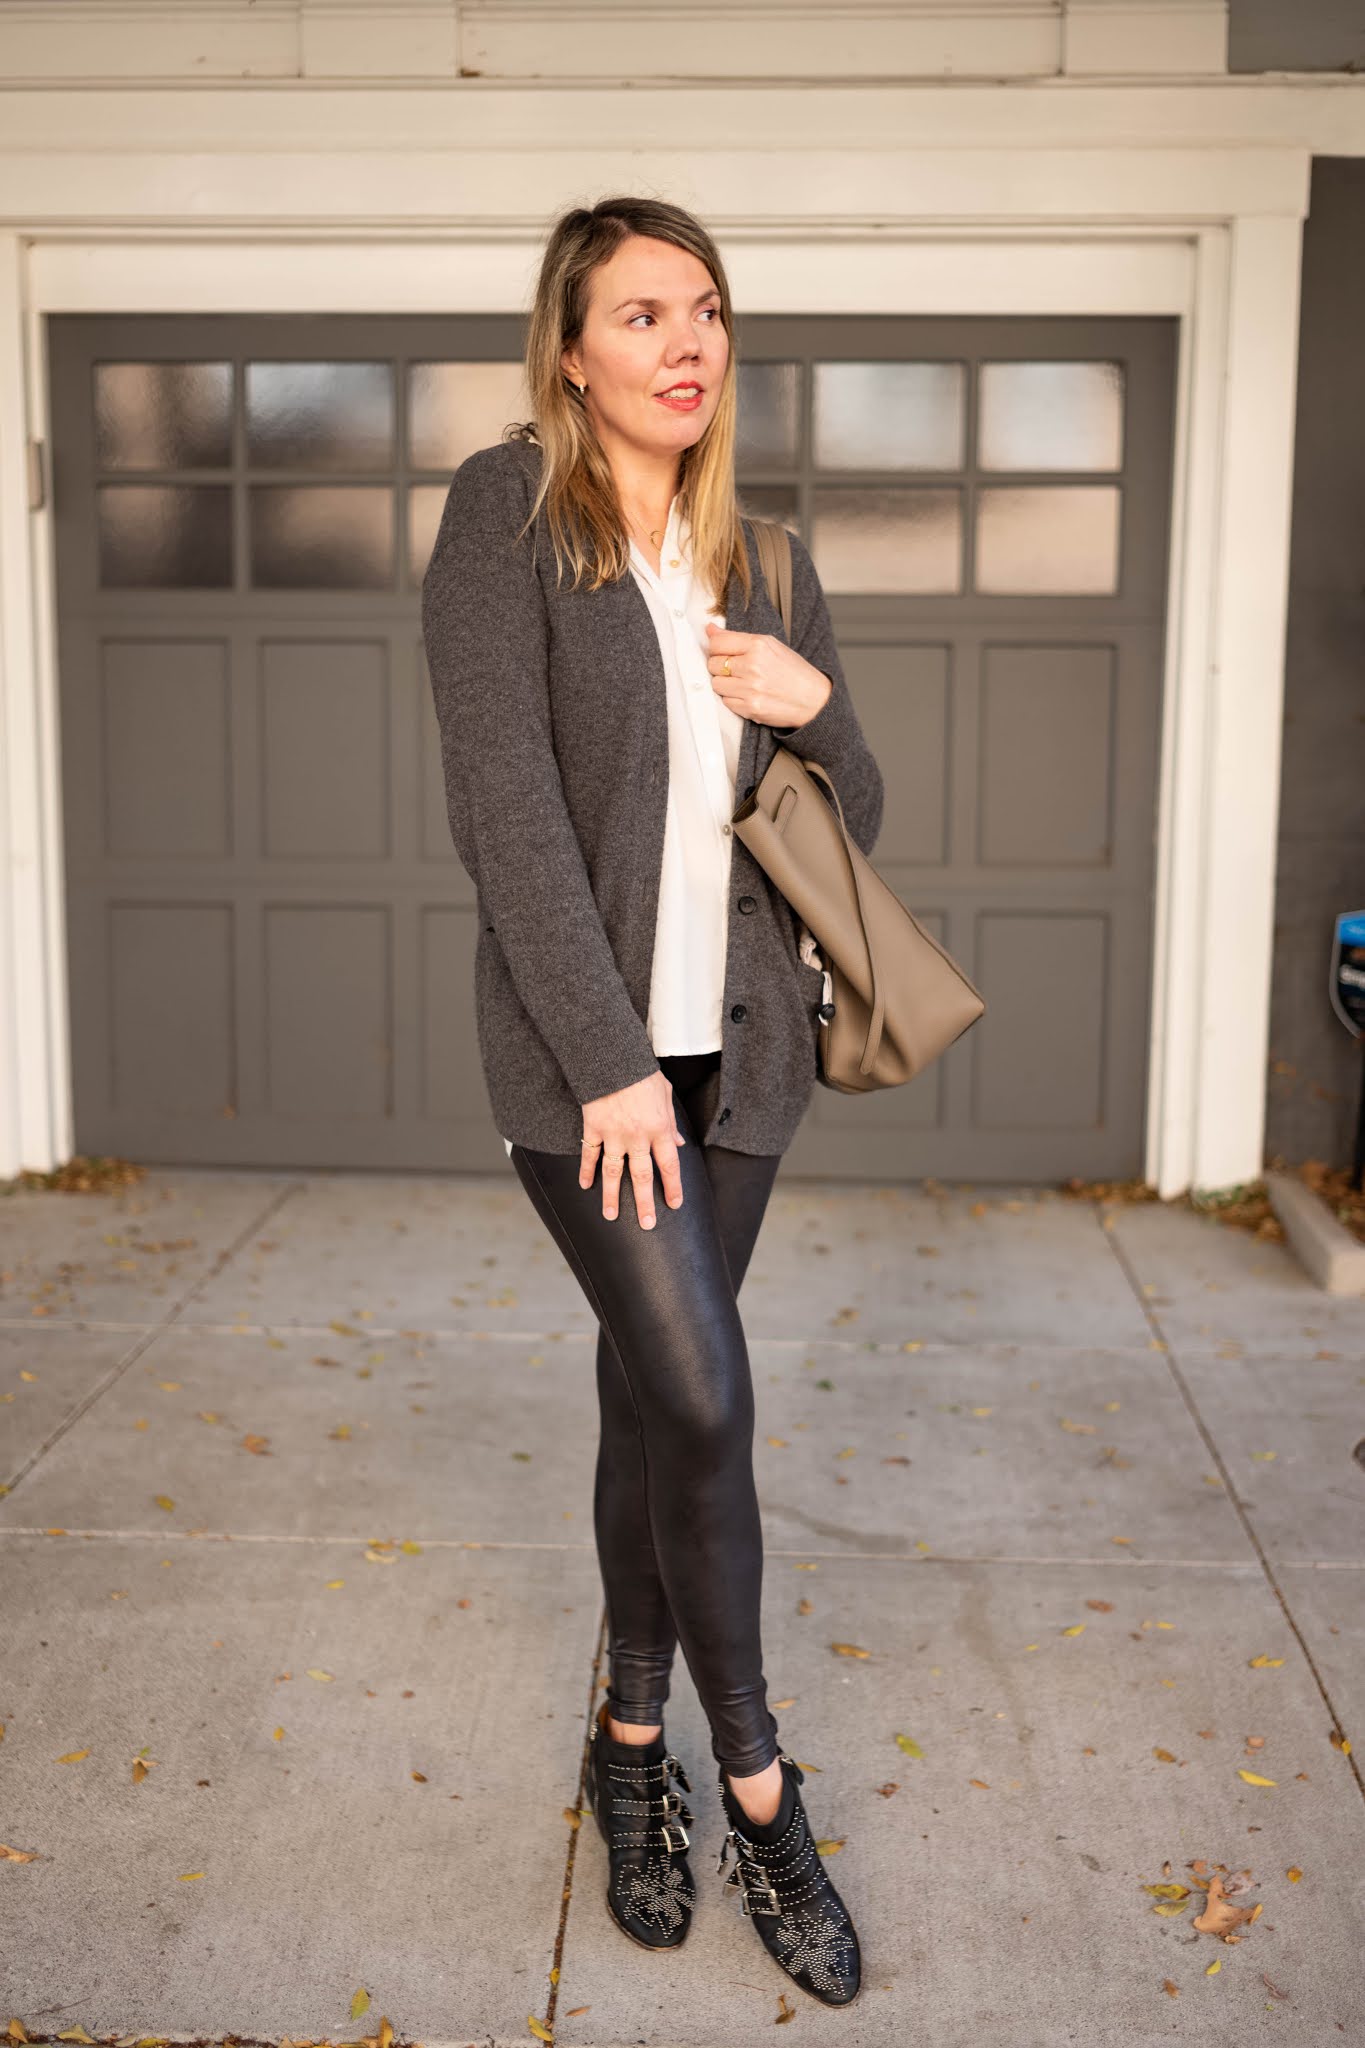 An Honest Review of The Spanx Faux Leather Leggings